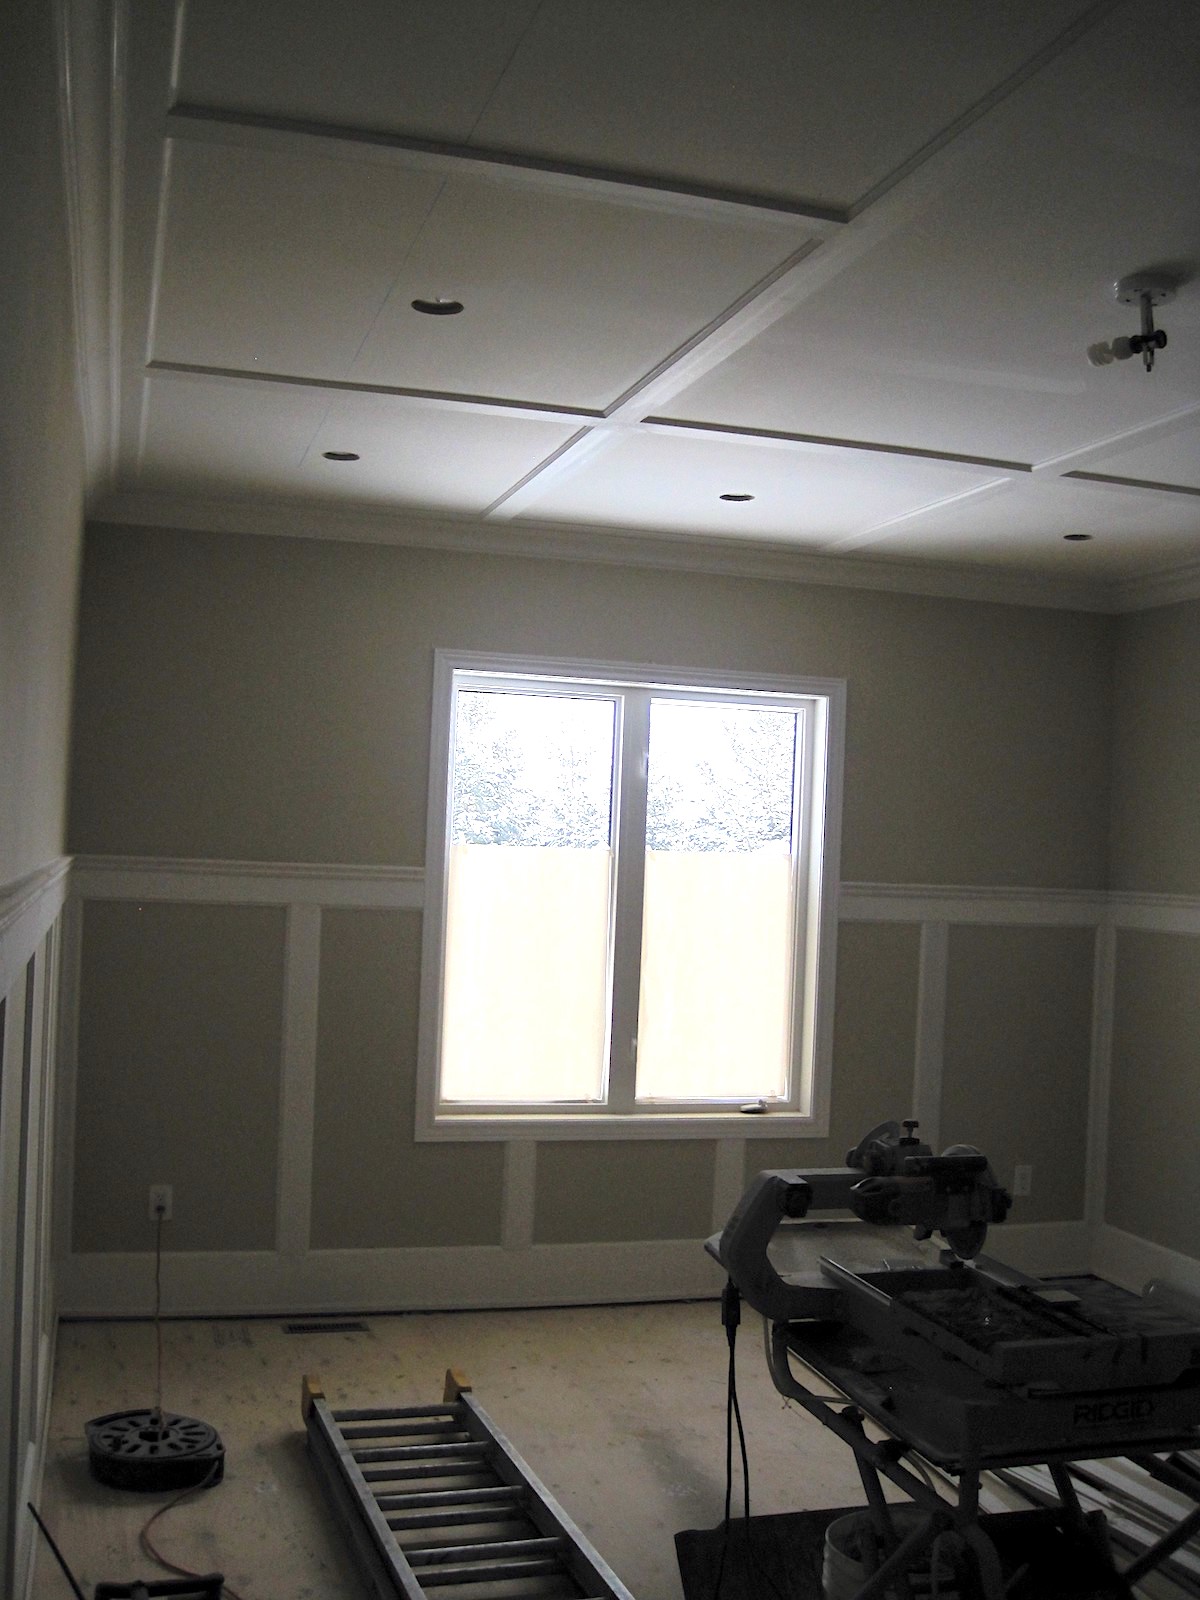 Tall wainscoting without panels being installed in a room